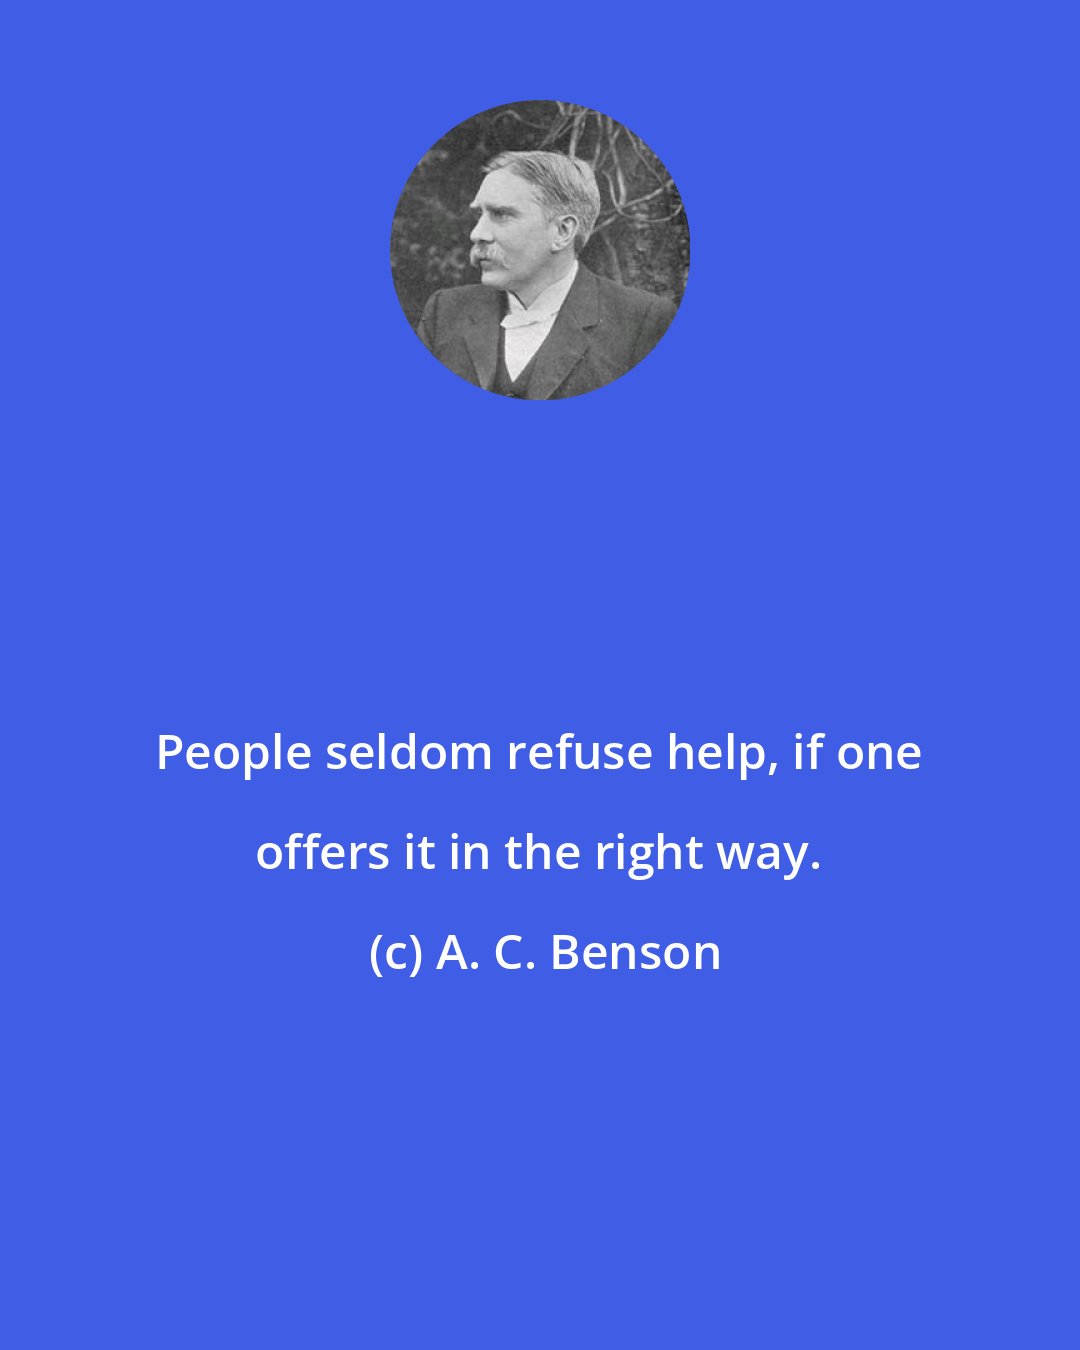 A. C. Benson: People seldom refuse help, if one offers it in the right way.